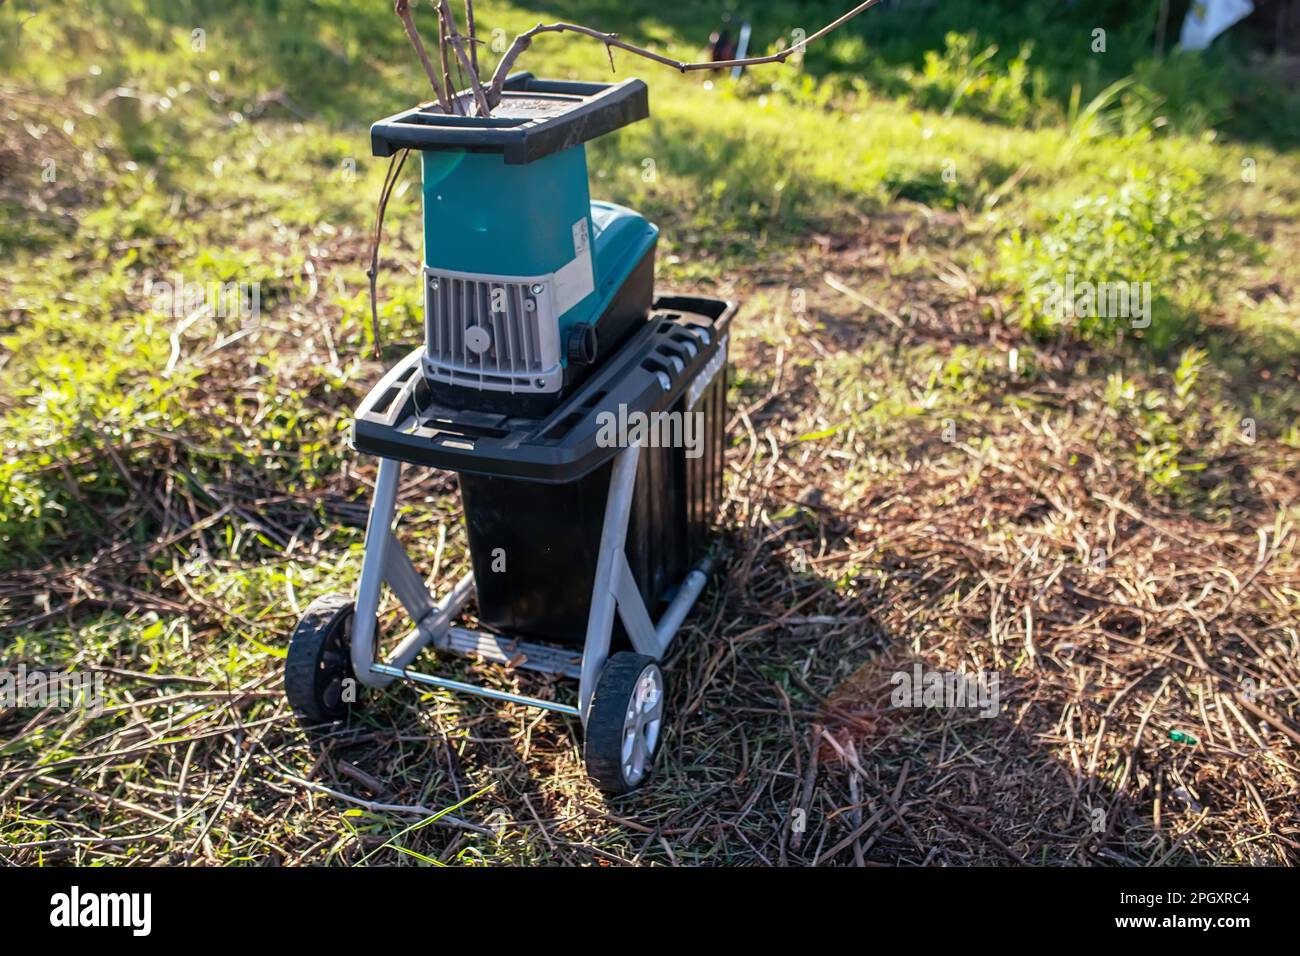 electric garden grinder to shred with a extended filled tank for crushed branches, ready for use in solid fuel boilers, or as mulch for garden work Stock Photo